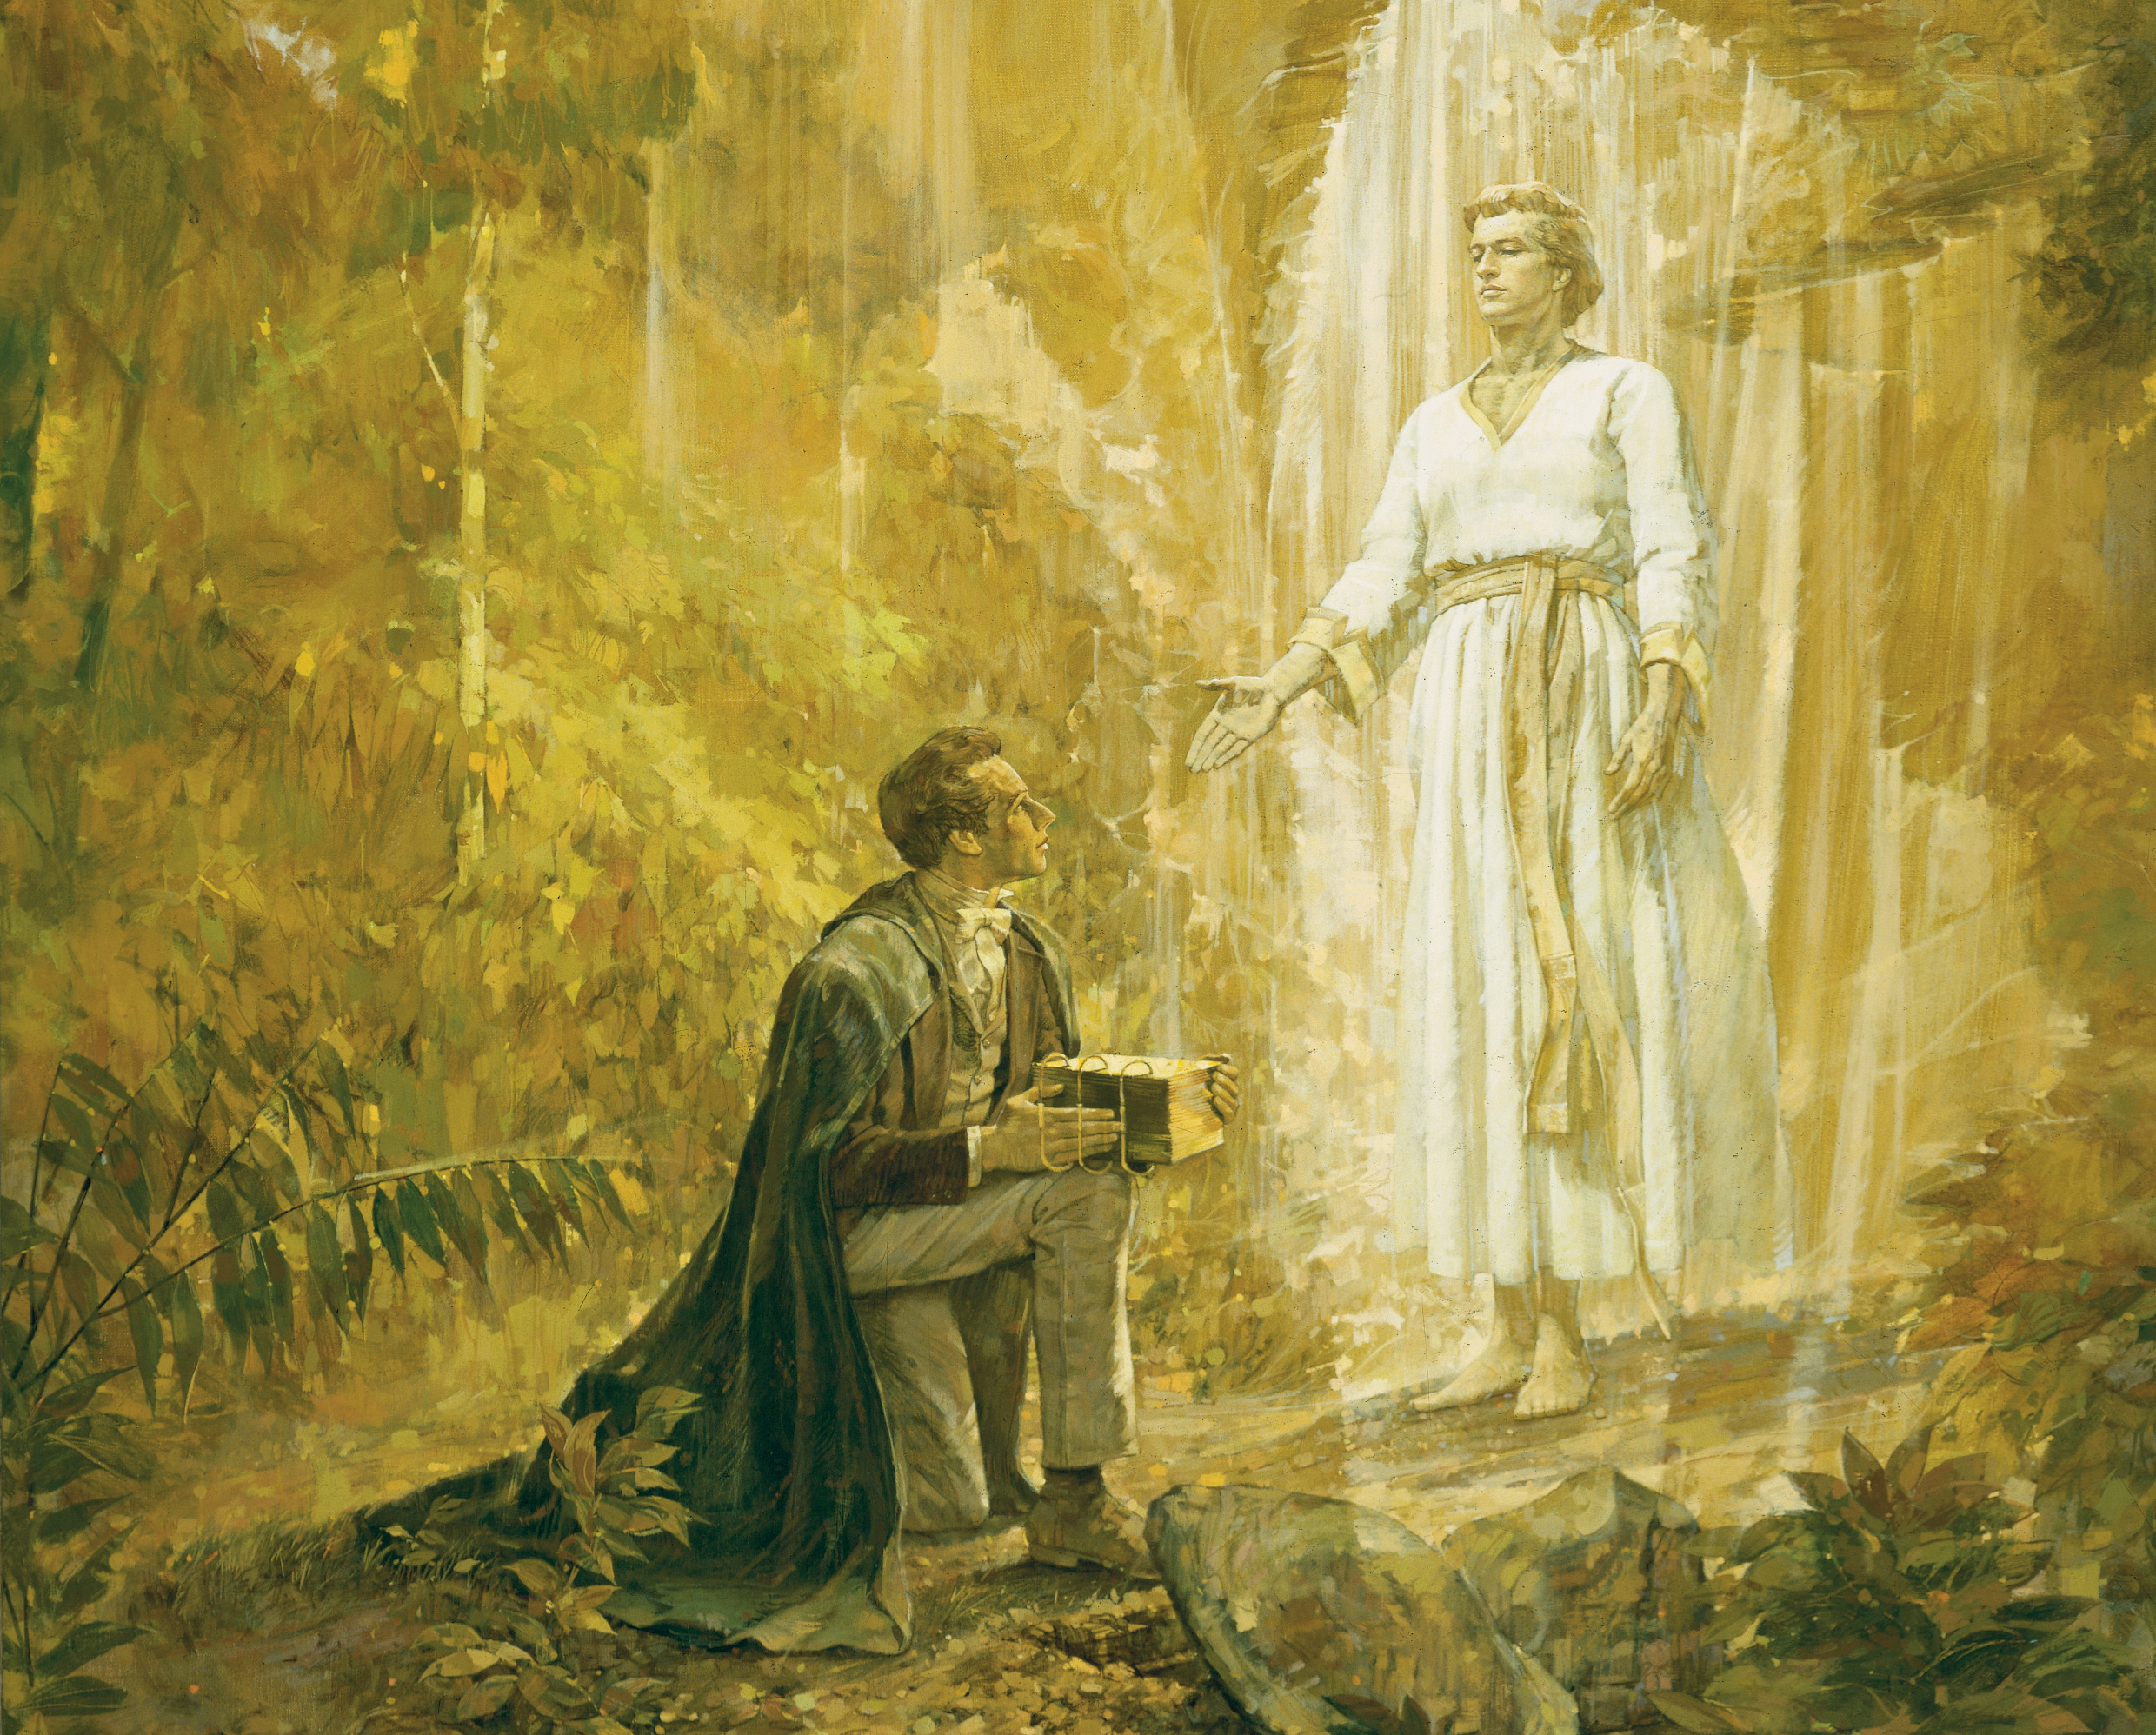 Joseph Smith kneeling on one knee and holding the gold plates as he looks up at the angel Moroni, who has appeared to him. Foreground and background depict plant and tree foliage.